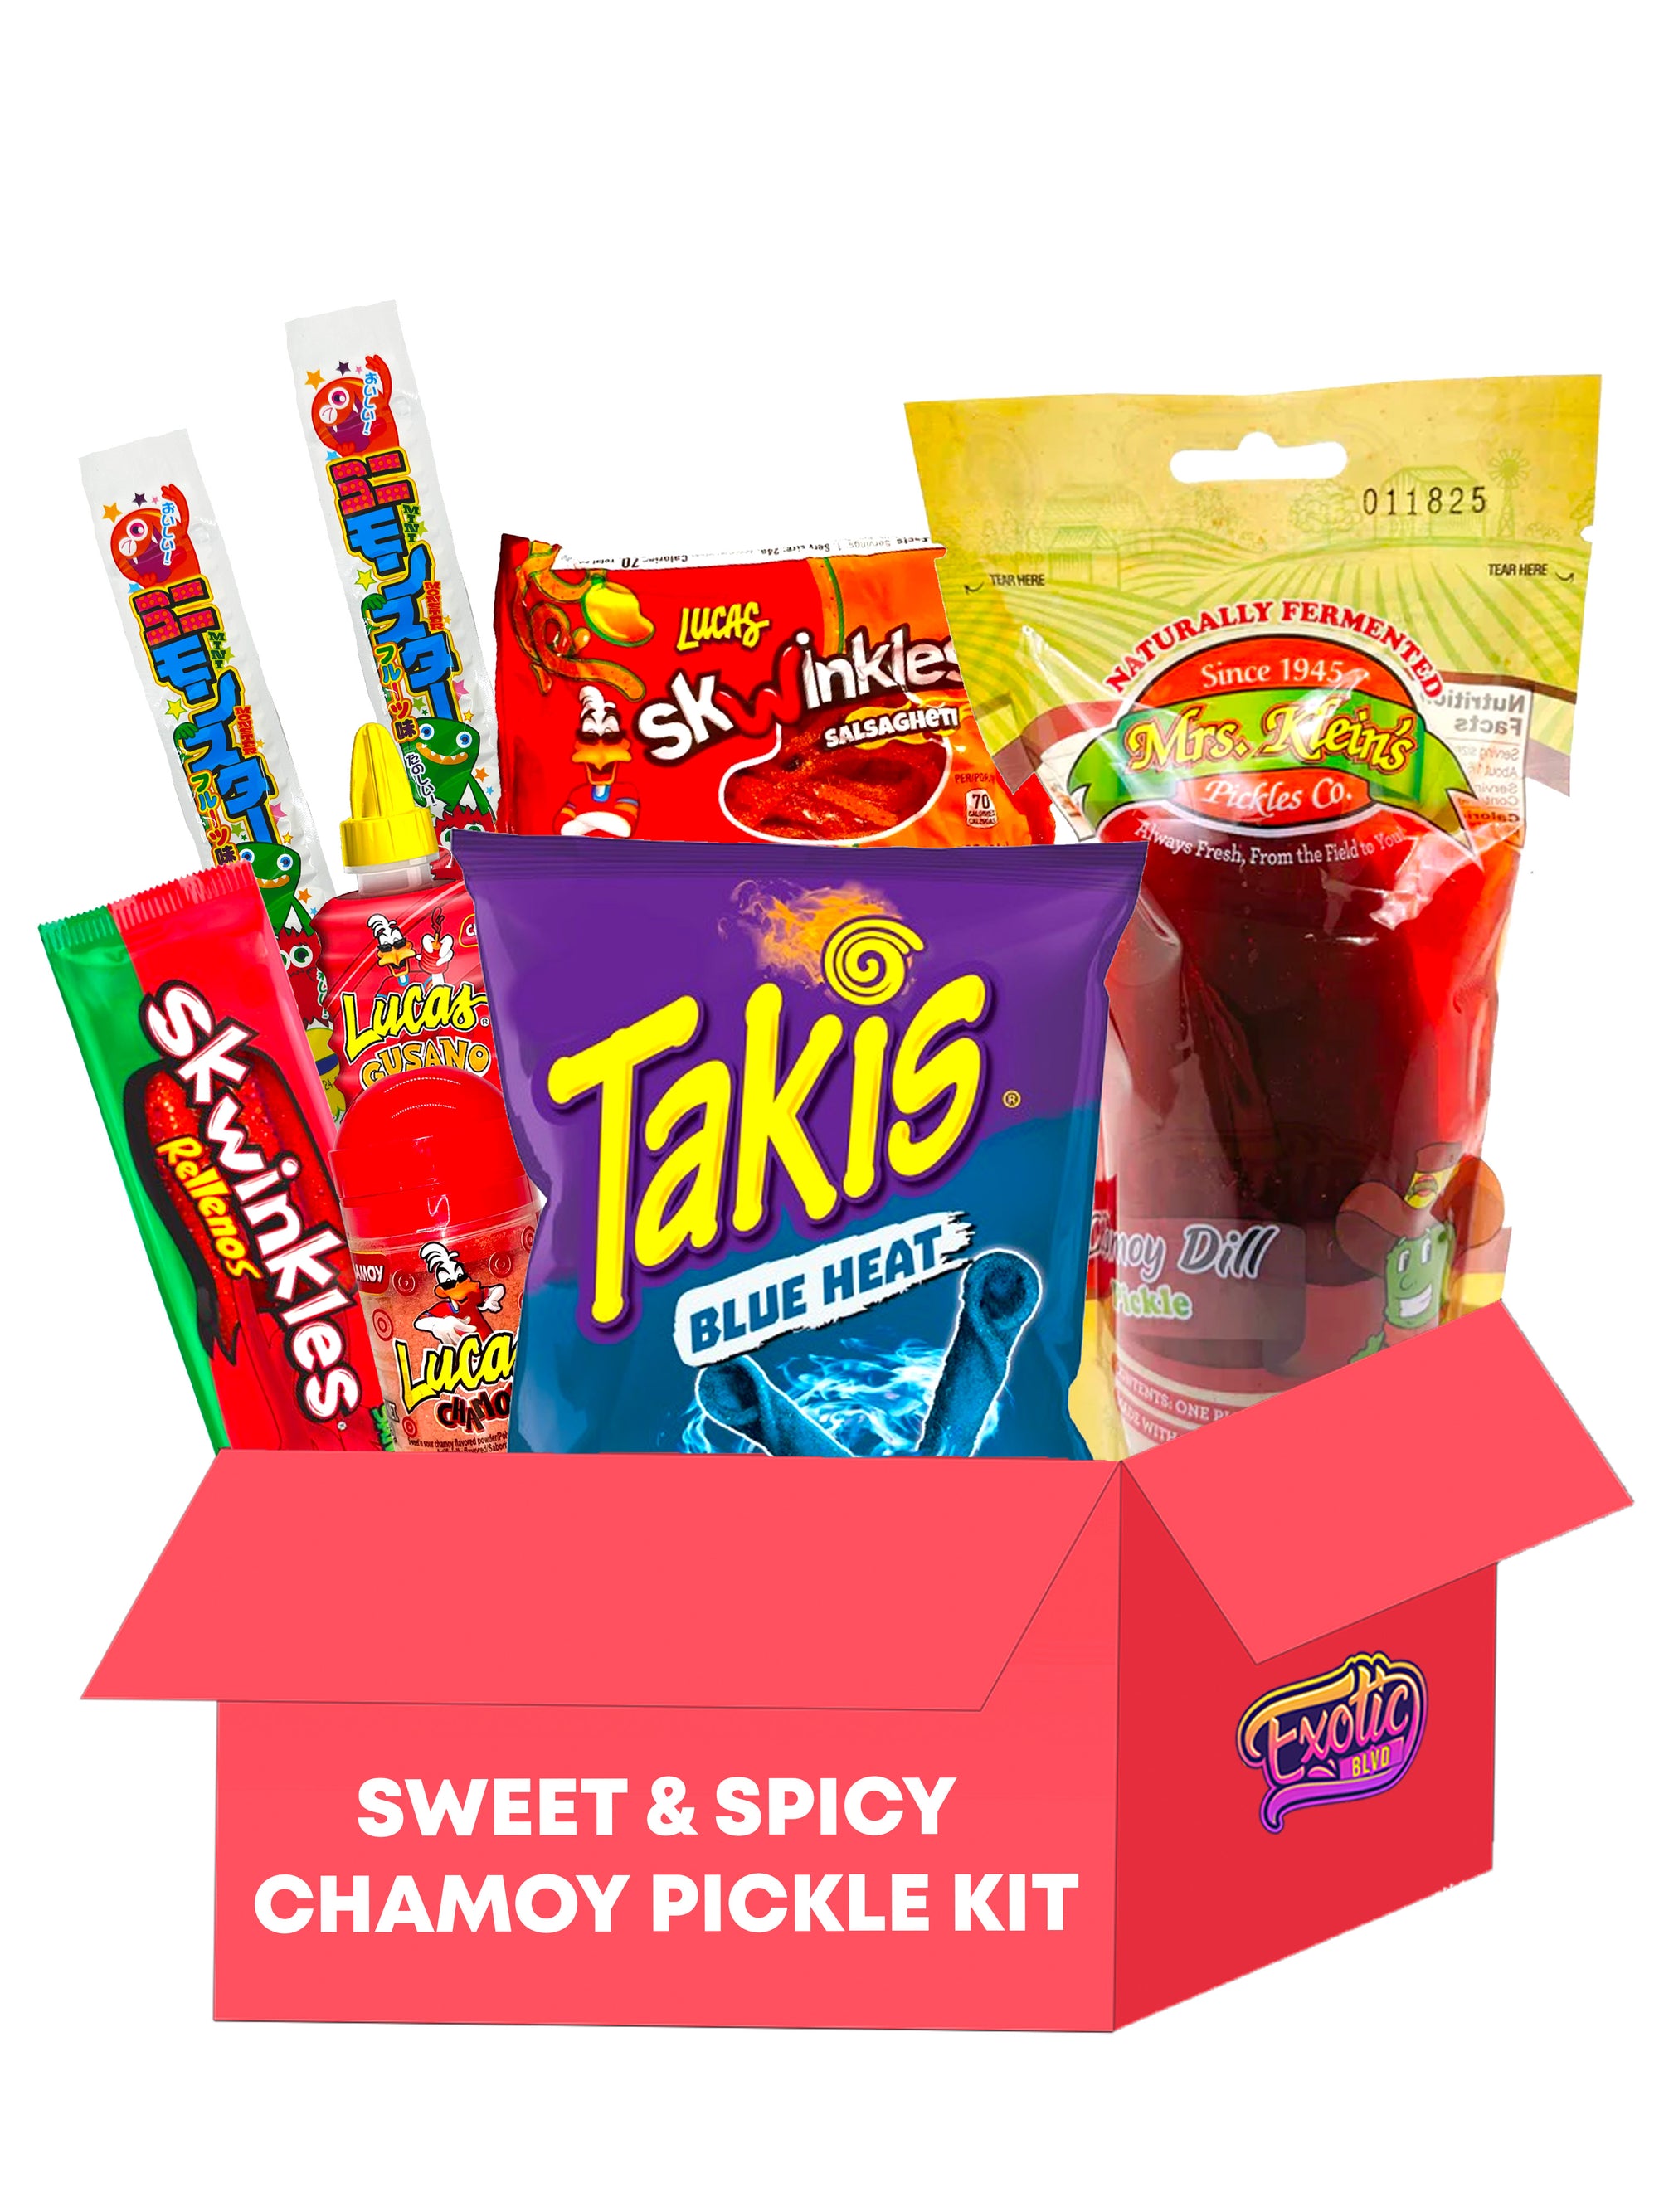 Sweet & Spicy Chamoy Pickle Kit